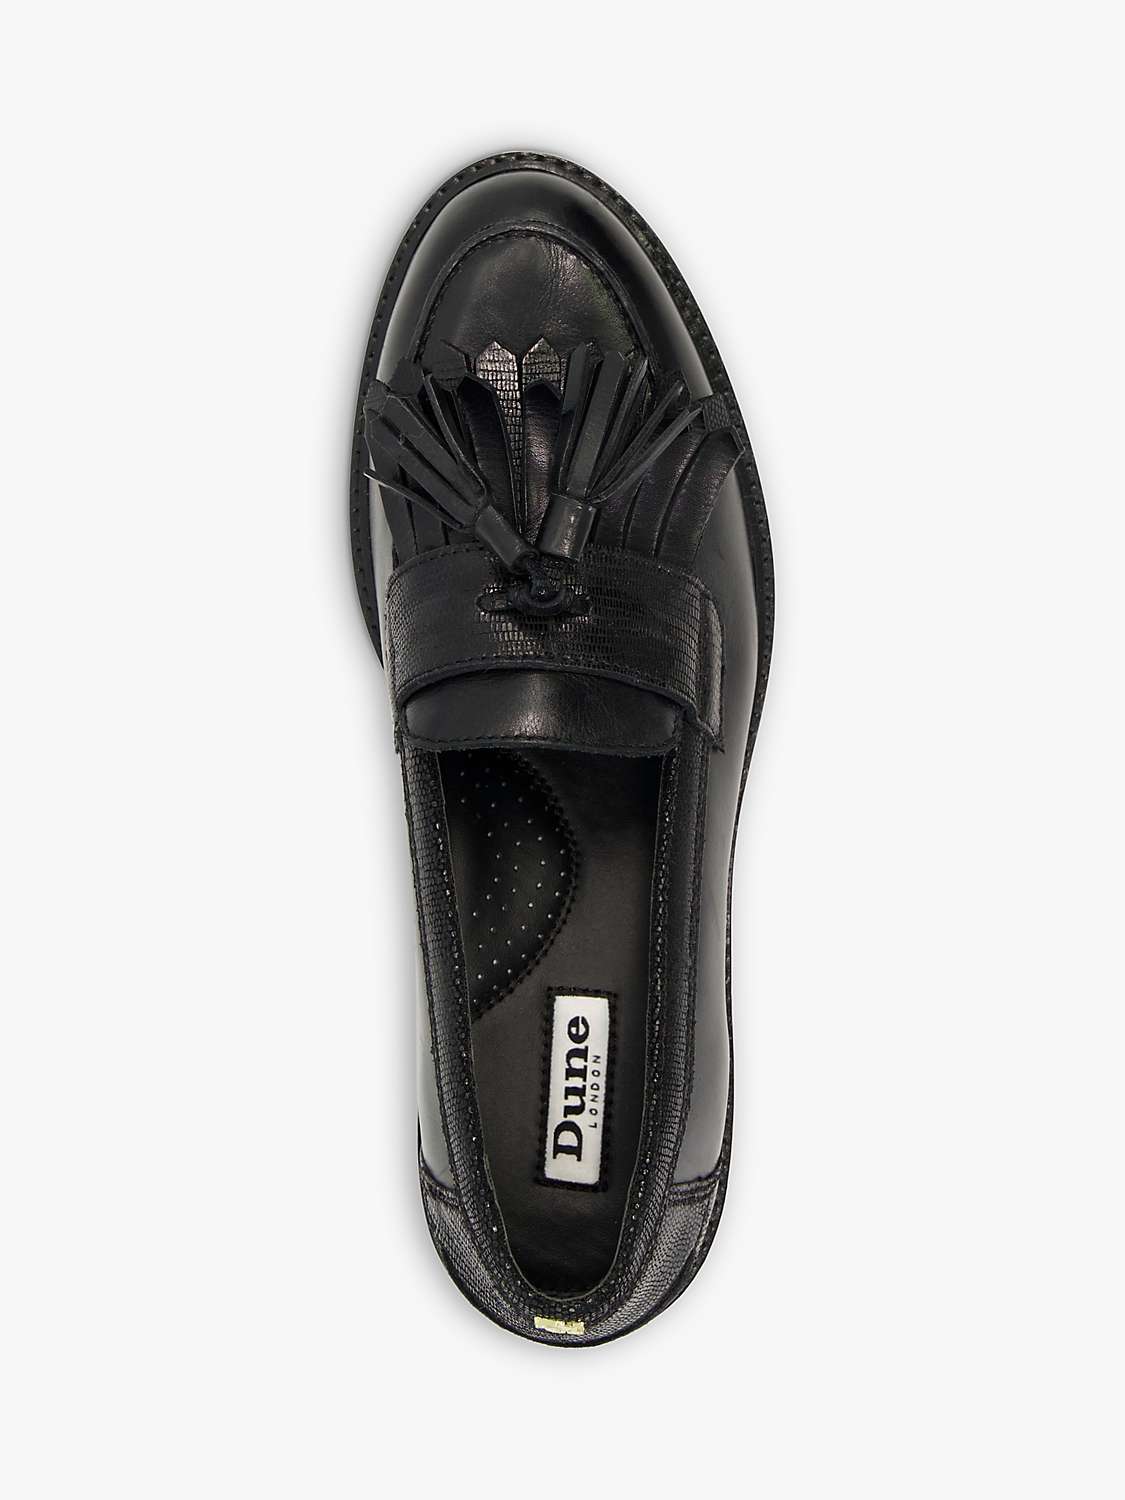 Dune Wide Fit Guardian Leather Loafers, Black at John Lewis & Partners